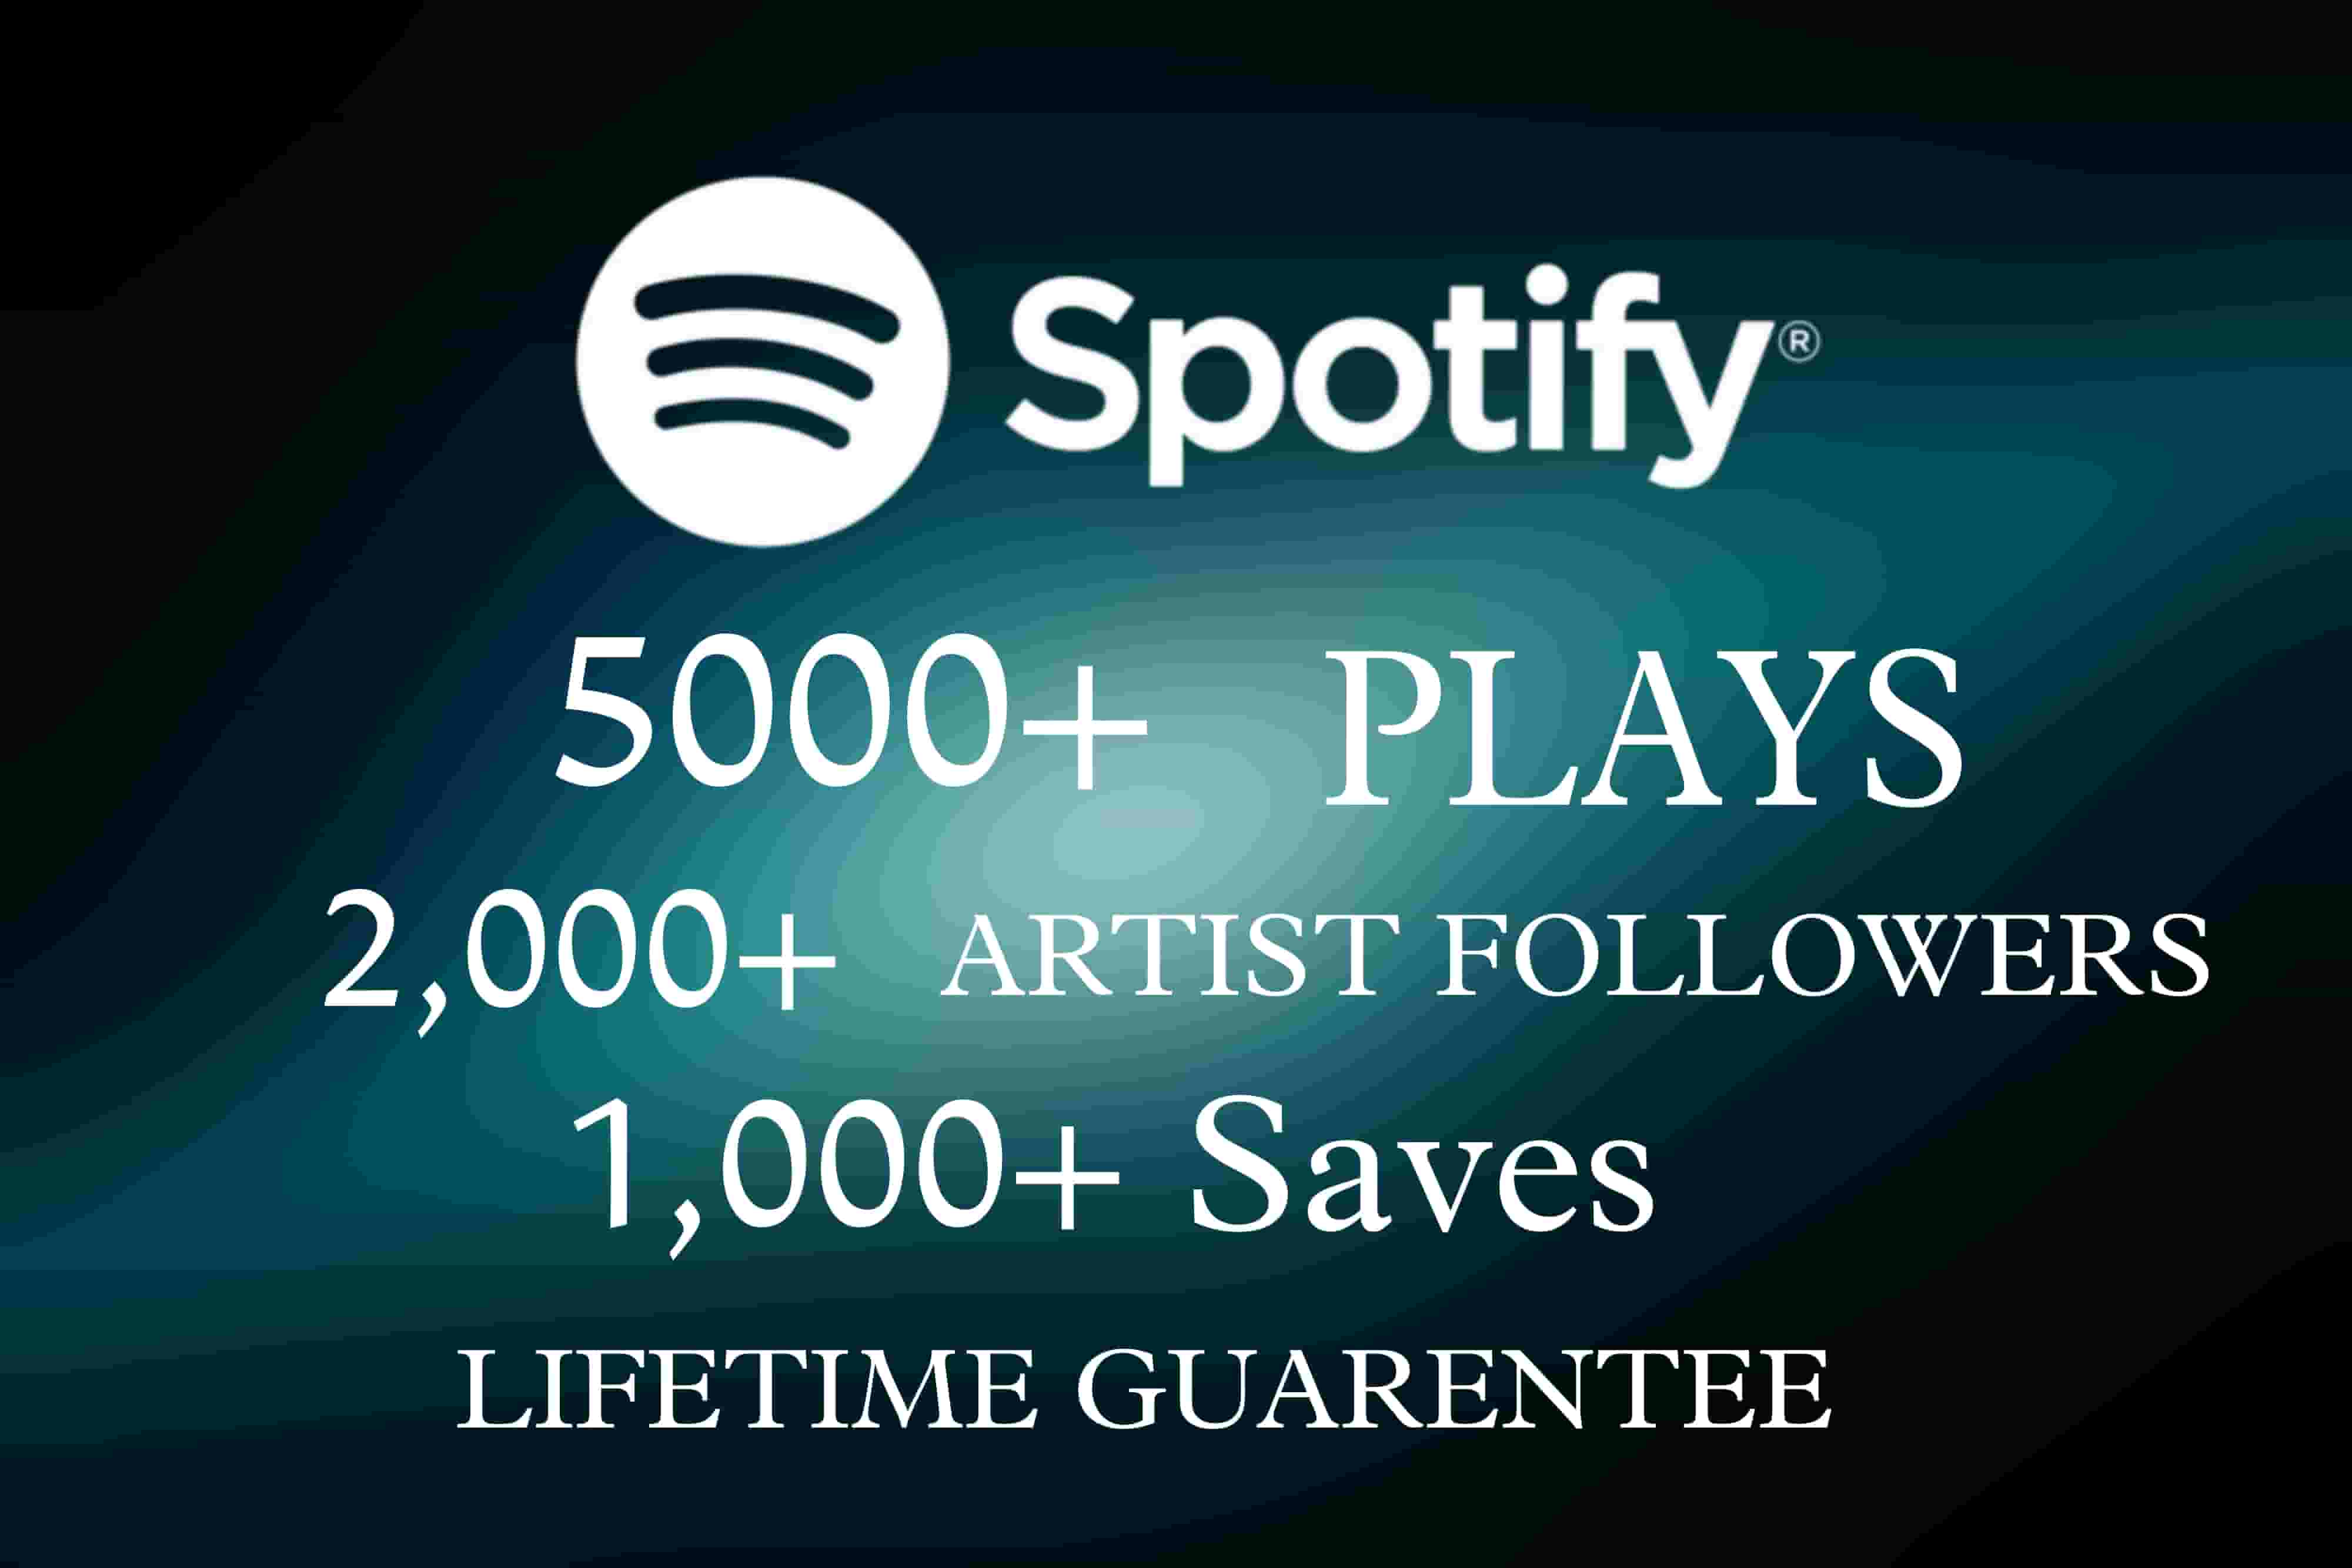 Spotify 5,000+ Plays, 2,000+ Artist Followers and 1,000+ Saves  Hq and Lifetime Guarentee